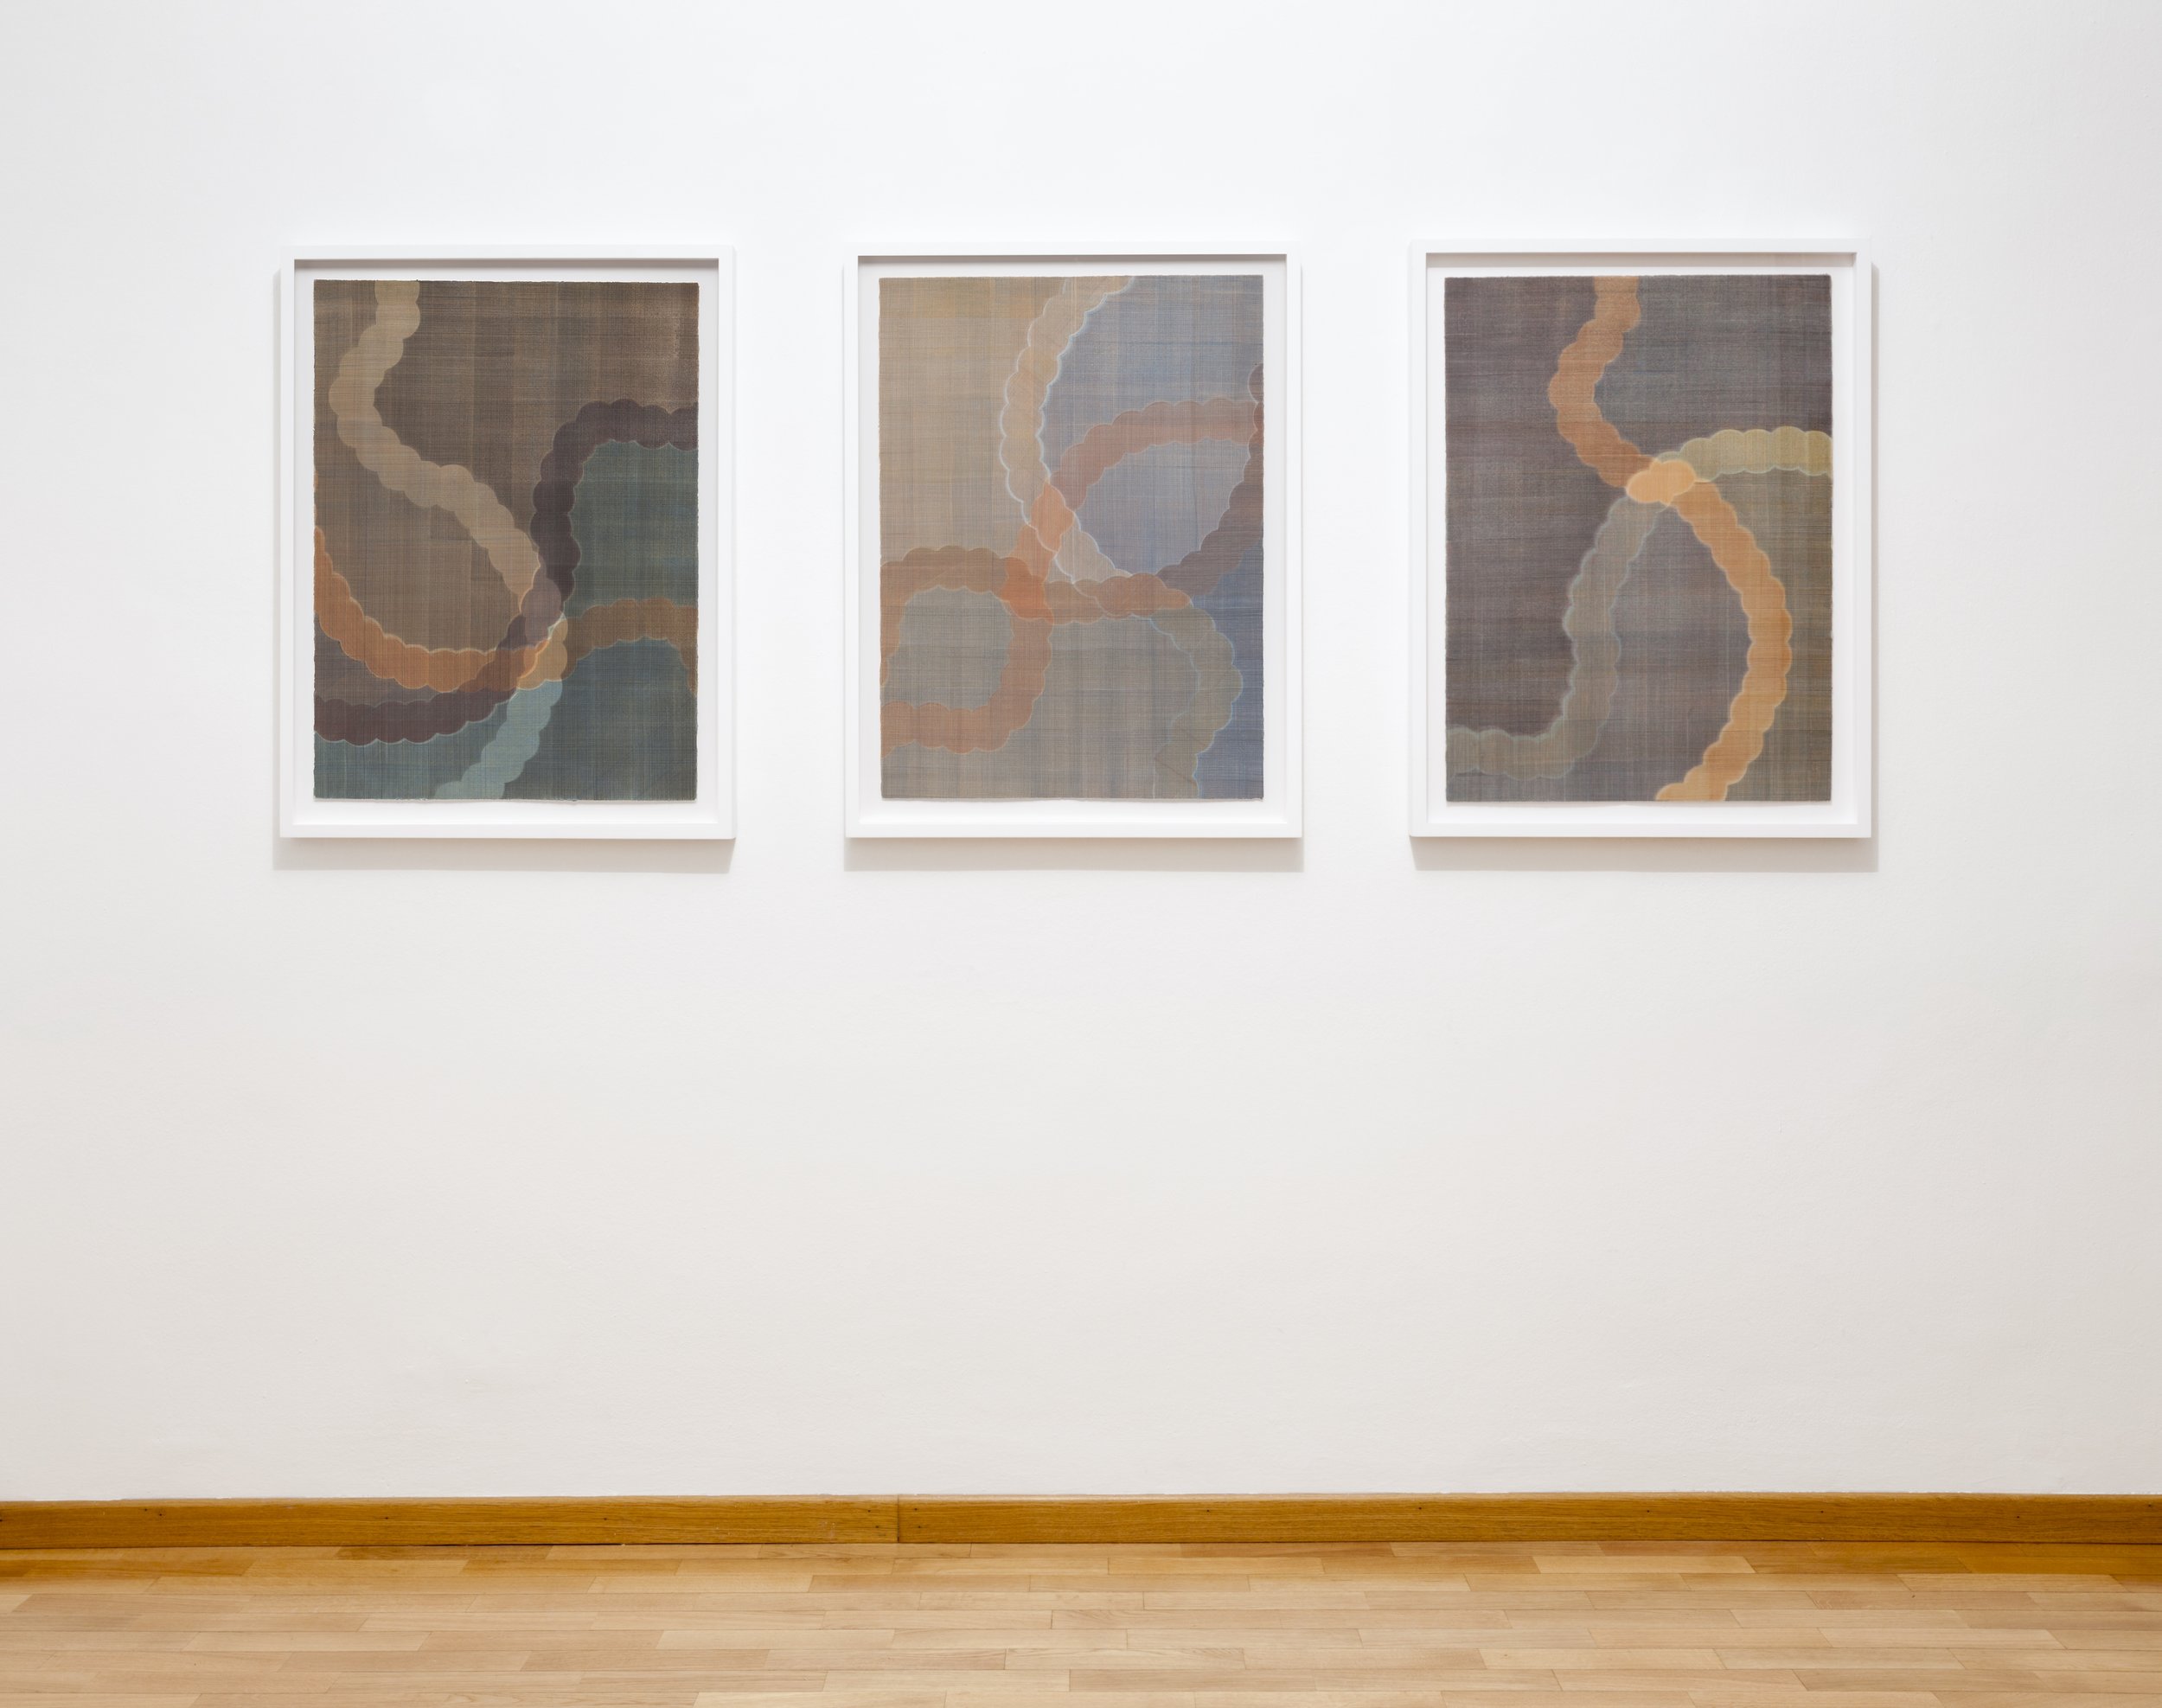  Three works from the  X  series   Installation view at Monica de Cardenas, Milan  Casein paint on paper  Each 76 x 56 cm (unframed)   